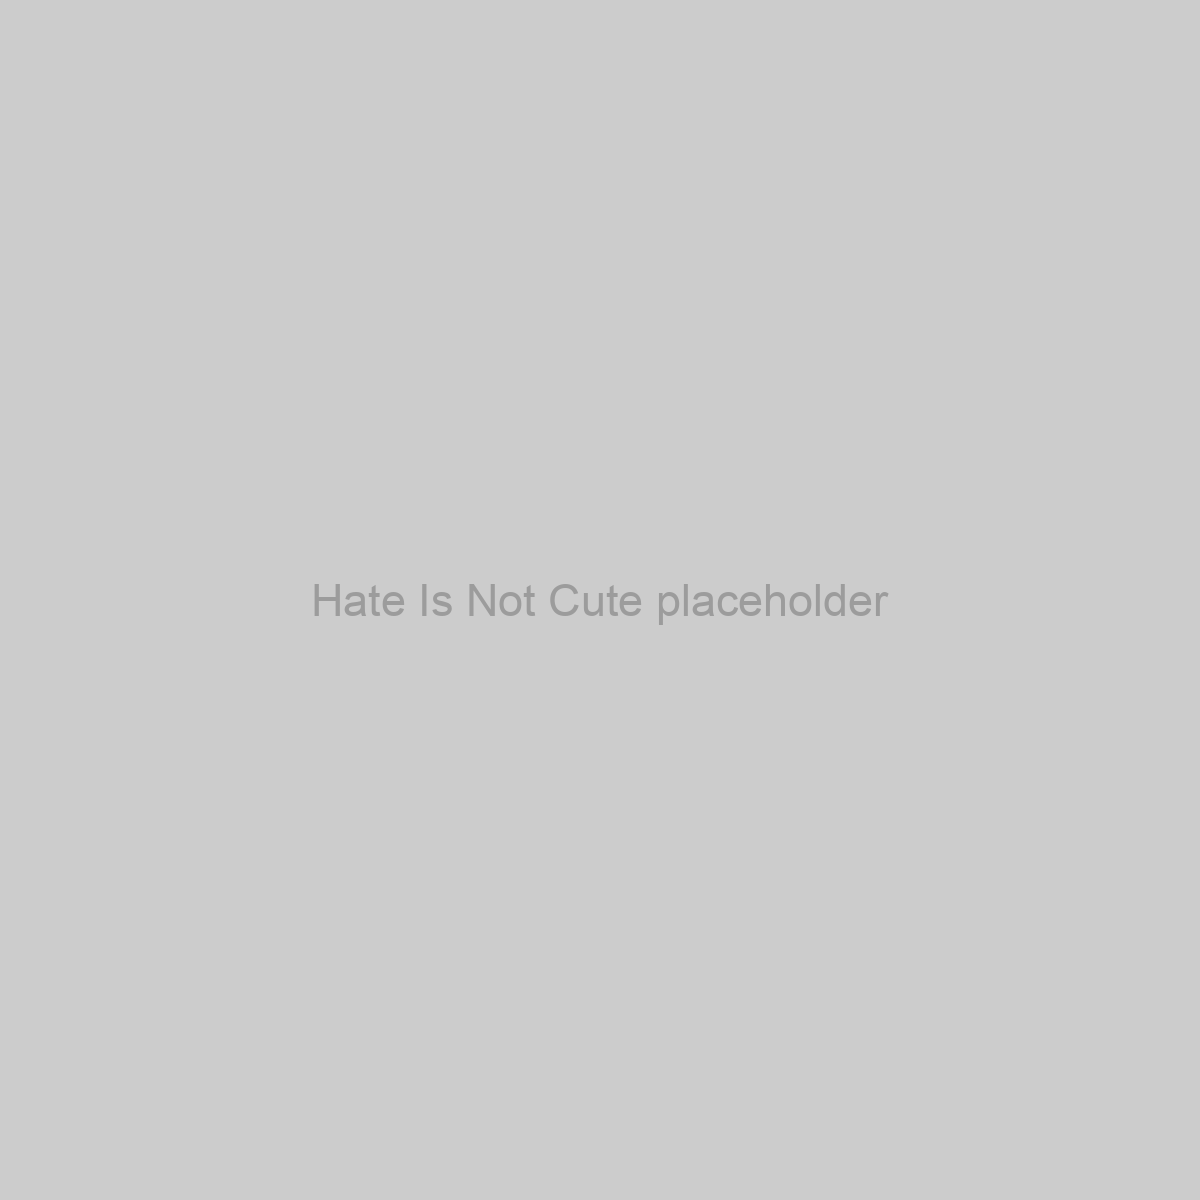 Hate Is Not Cute Placeholder Image